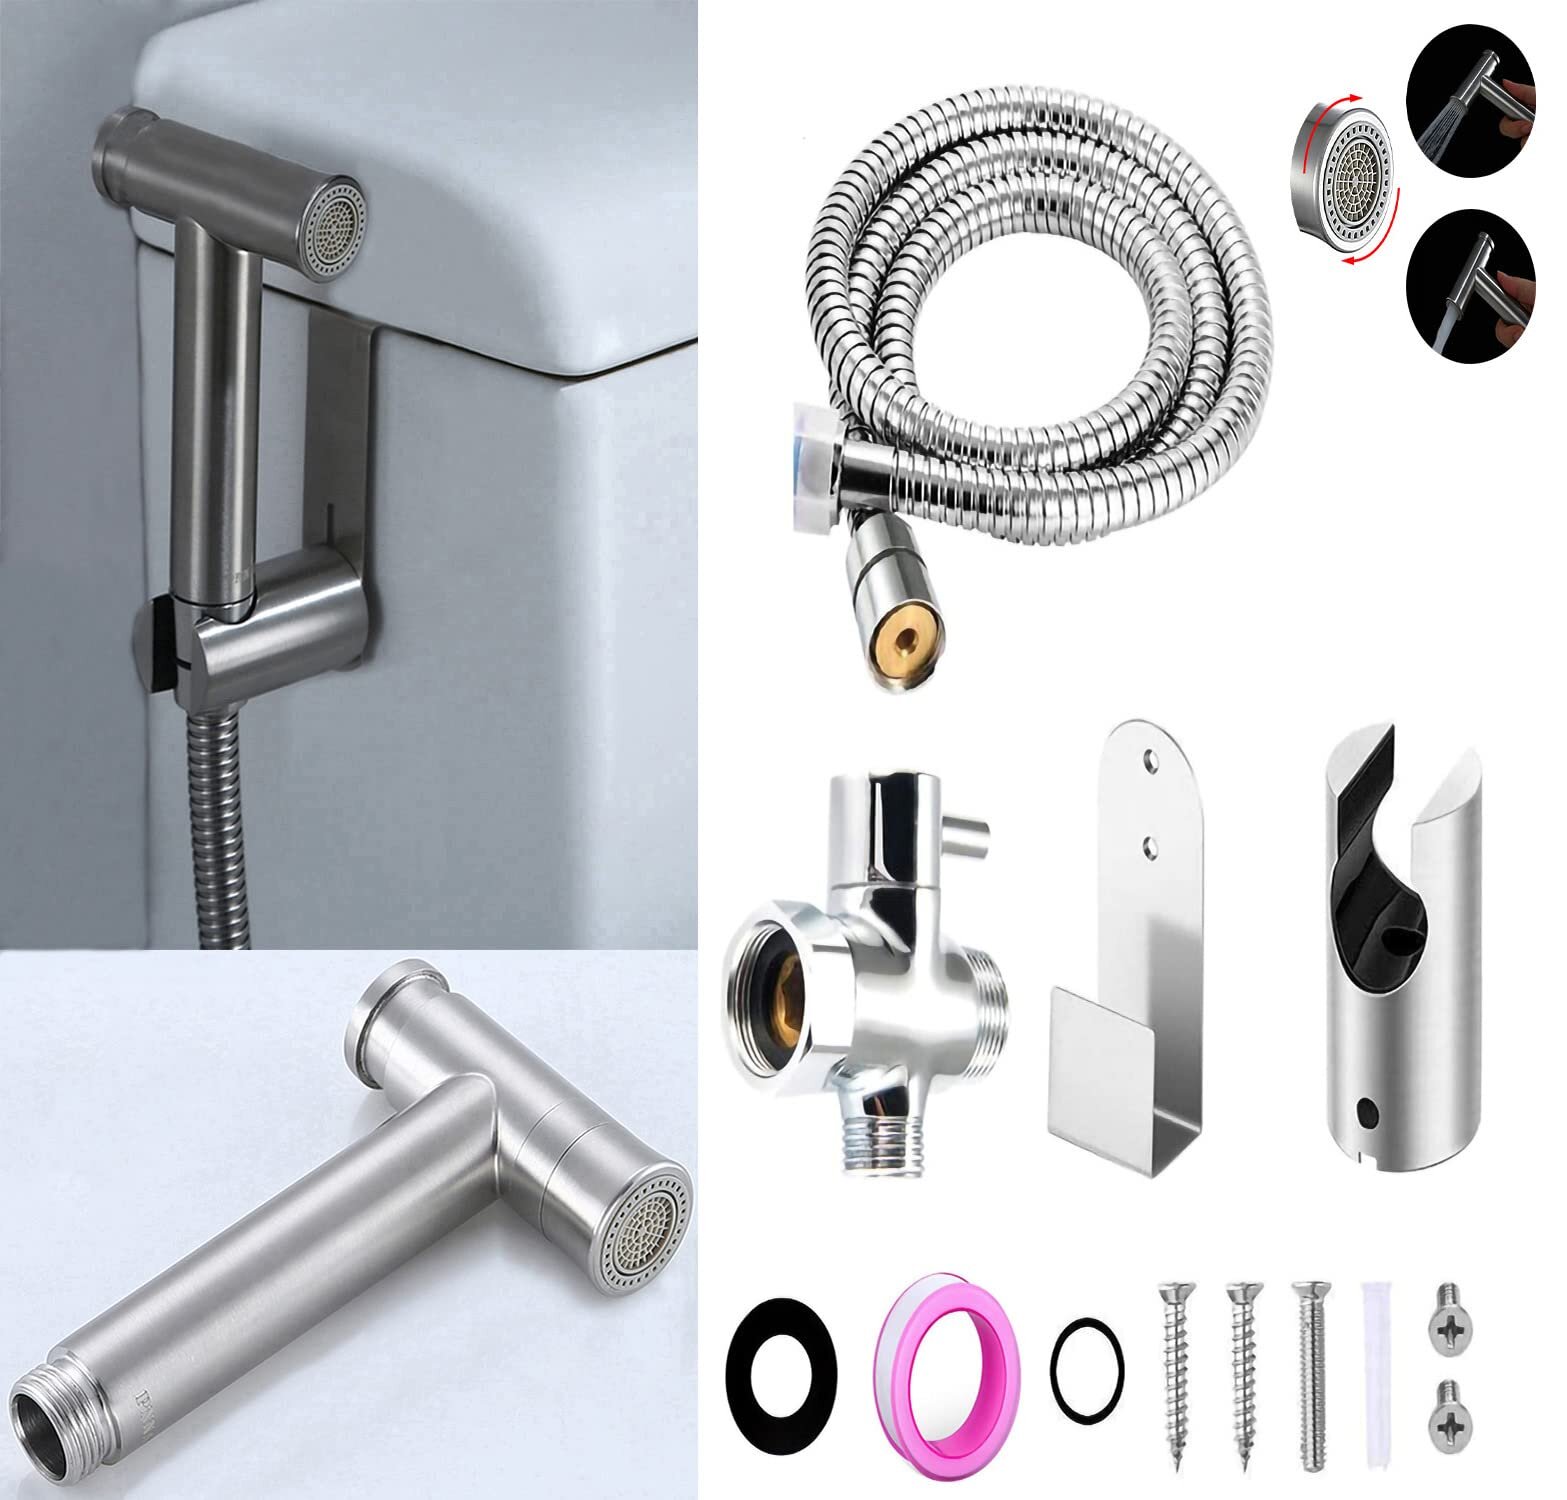 Faucets Accessories ABS Portable Bathroom Toilet Bidet Adjustable Flow Detachable Cleaning Shower Head Nozzle Cloth Diaper Sprayer for Personal Hygiene 